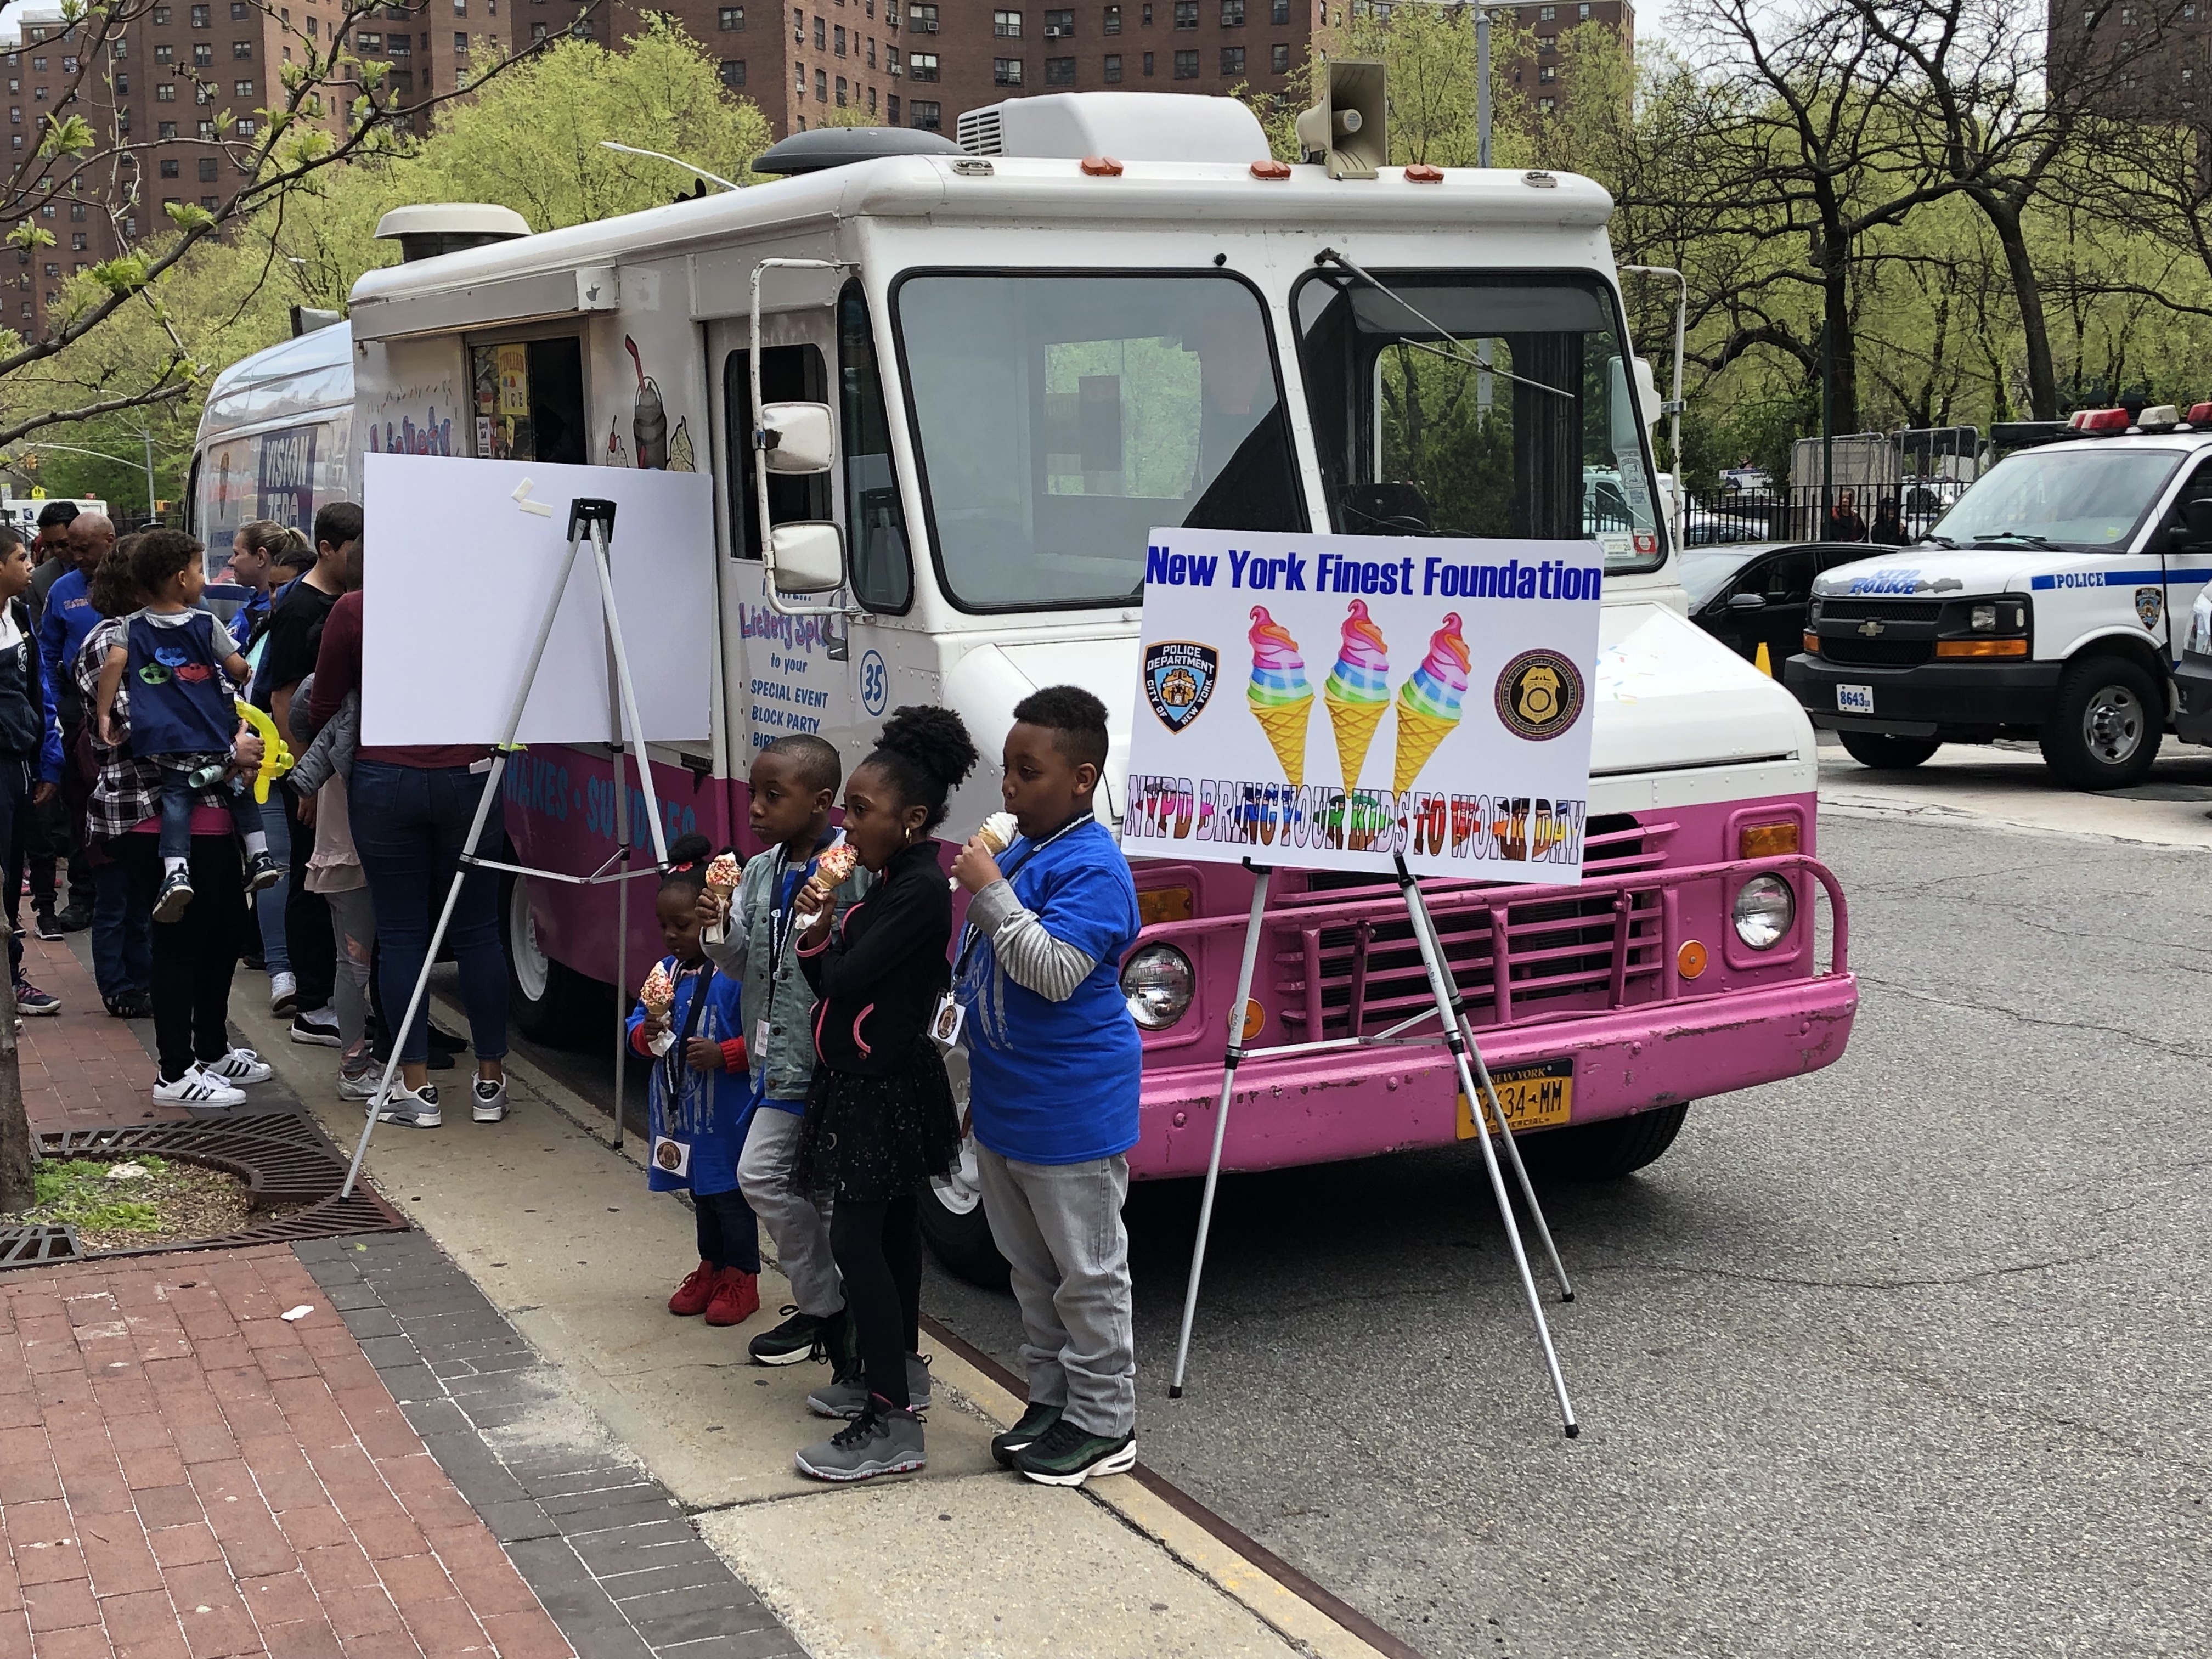 2019 NYPD Bring Your Child to Work Day